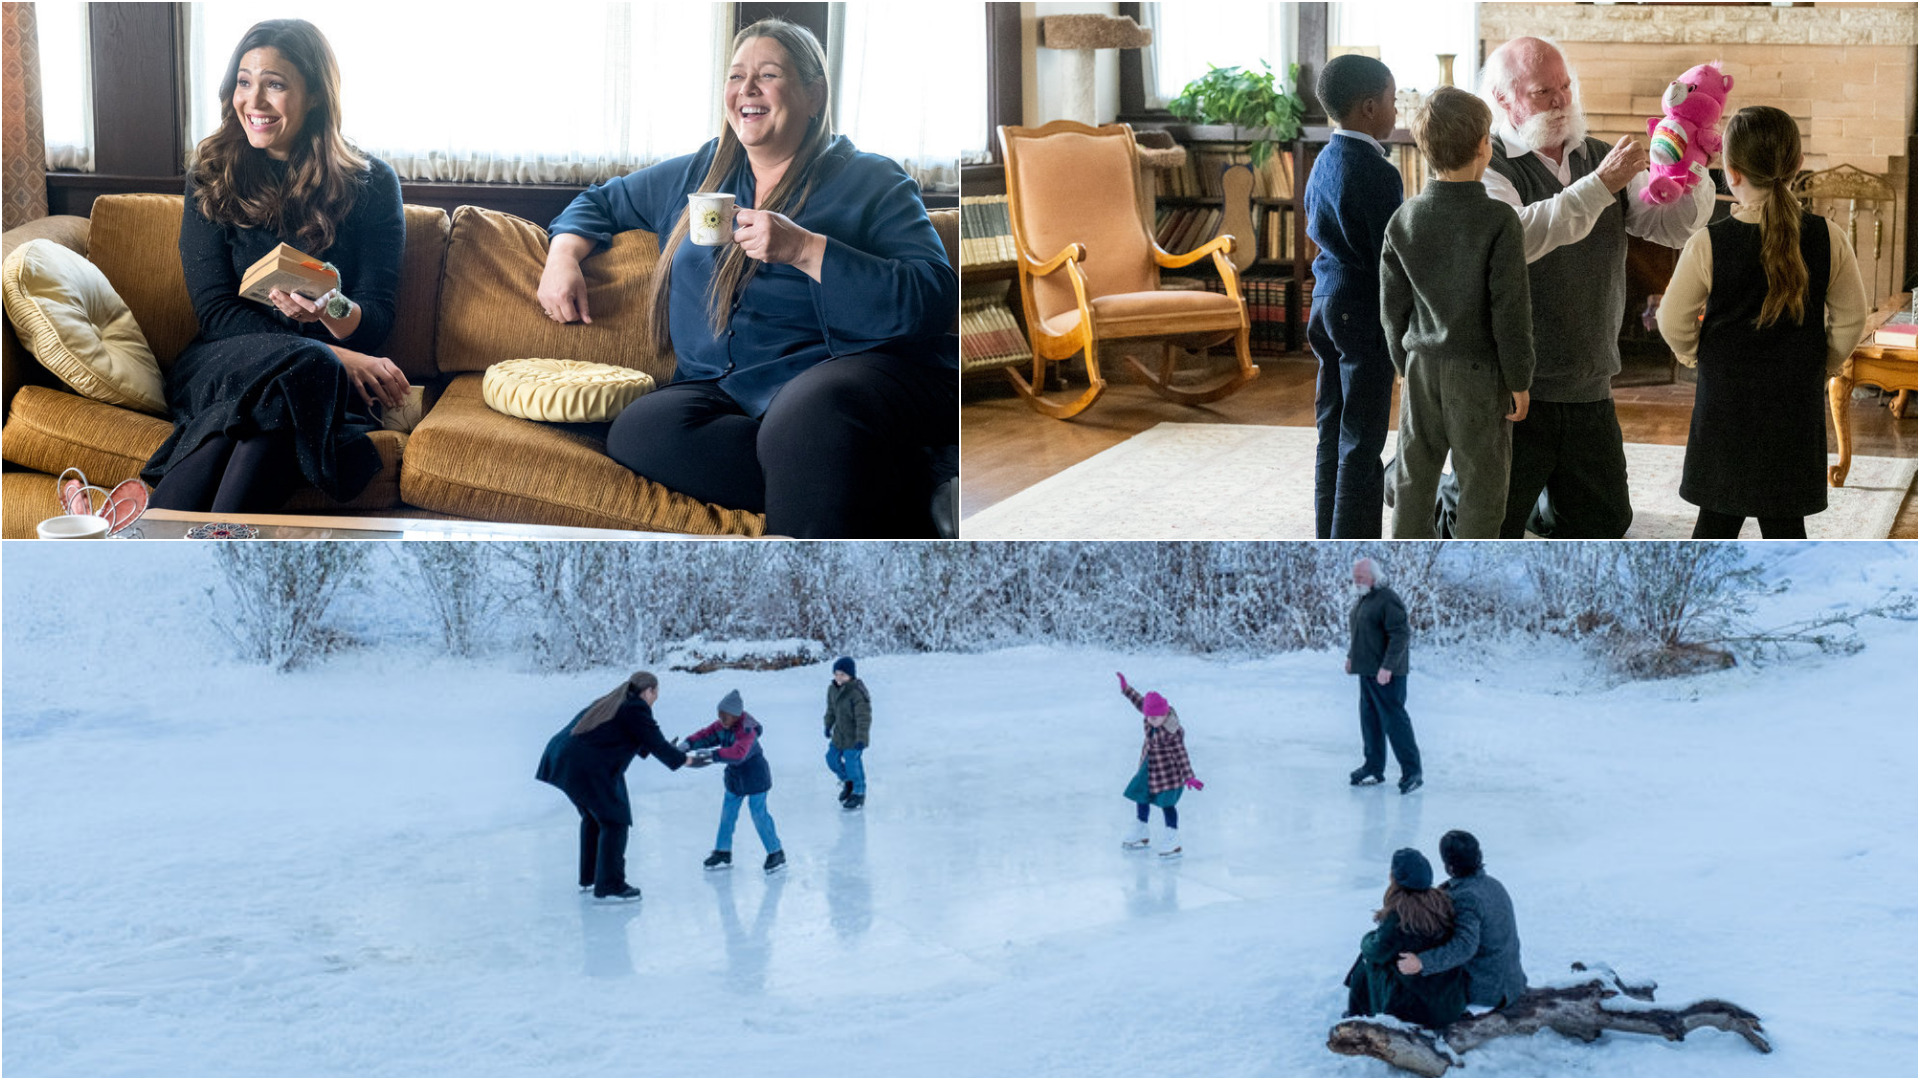 Collage of photos from ‘This Is Us’ Season 6 Episode 4 with Camryn Manheim as Debby, Isabella Rose Landau as Kate, Ca’Ron Jaden Coleman as Randall, Kaz Womack as Kevin, Jim Cody Williams as Mike, Milo Ventimiglia as Jack, Mandy Moore as Rebecca